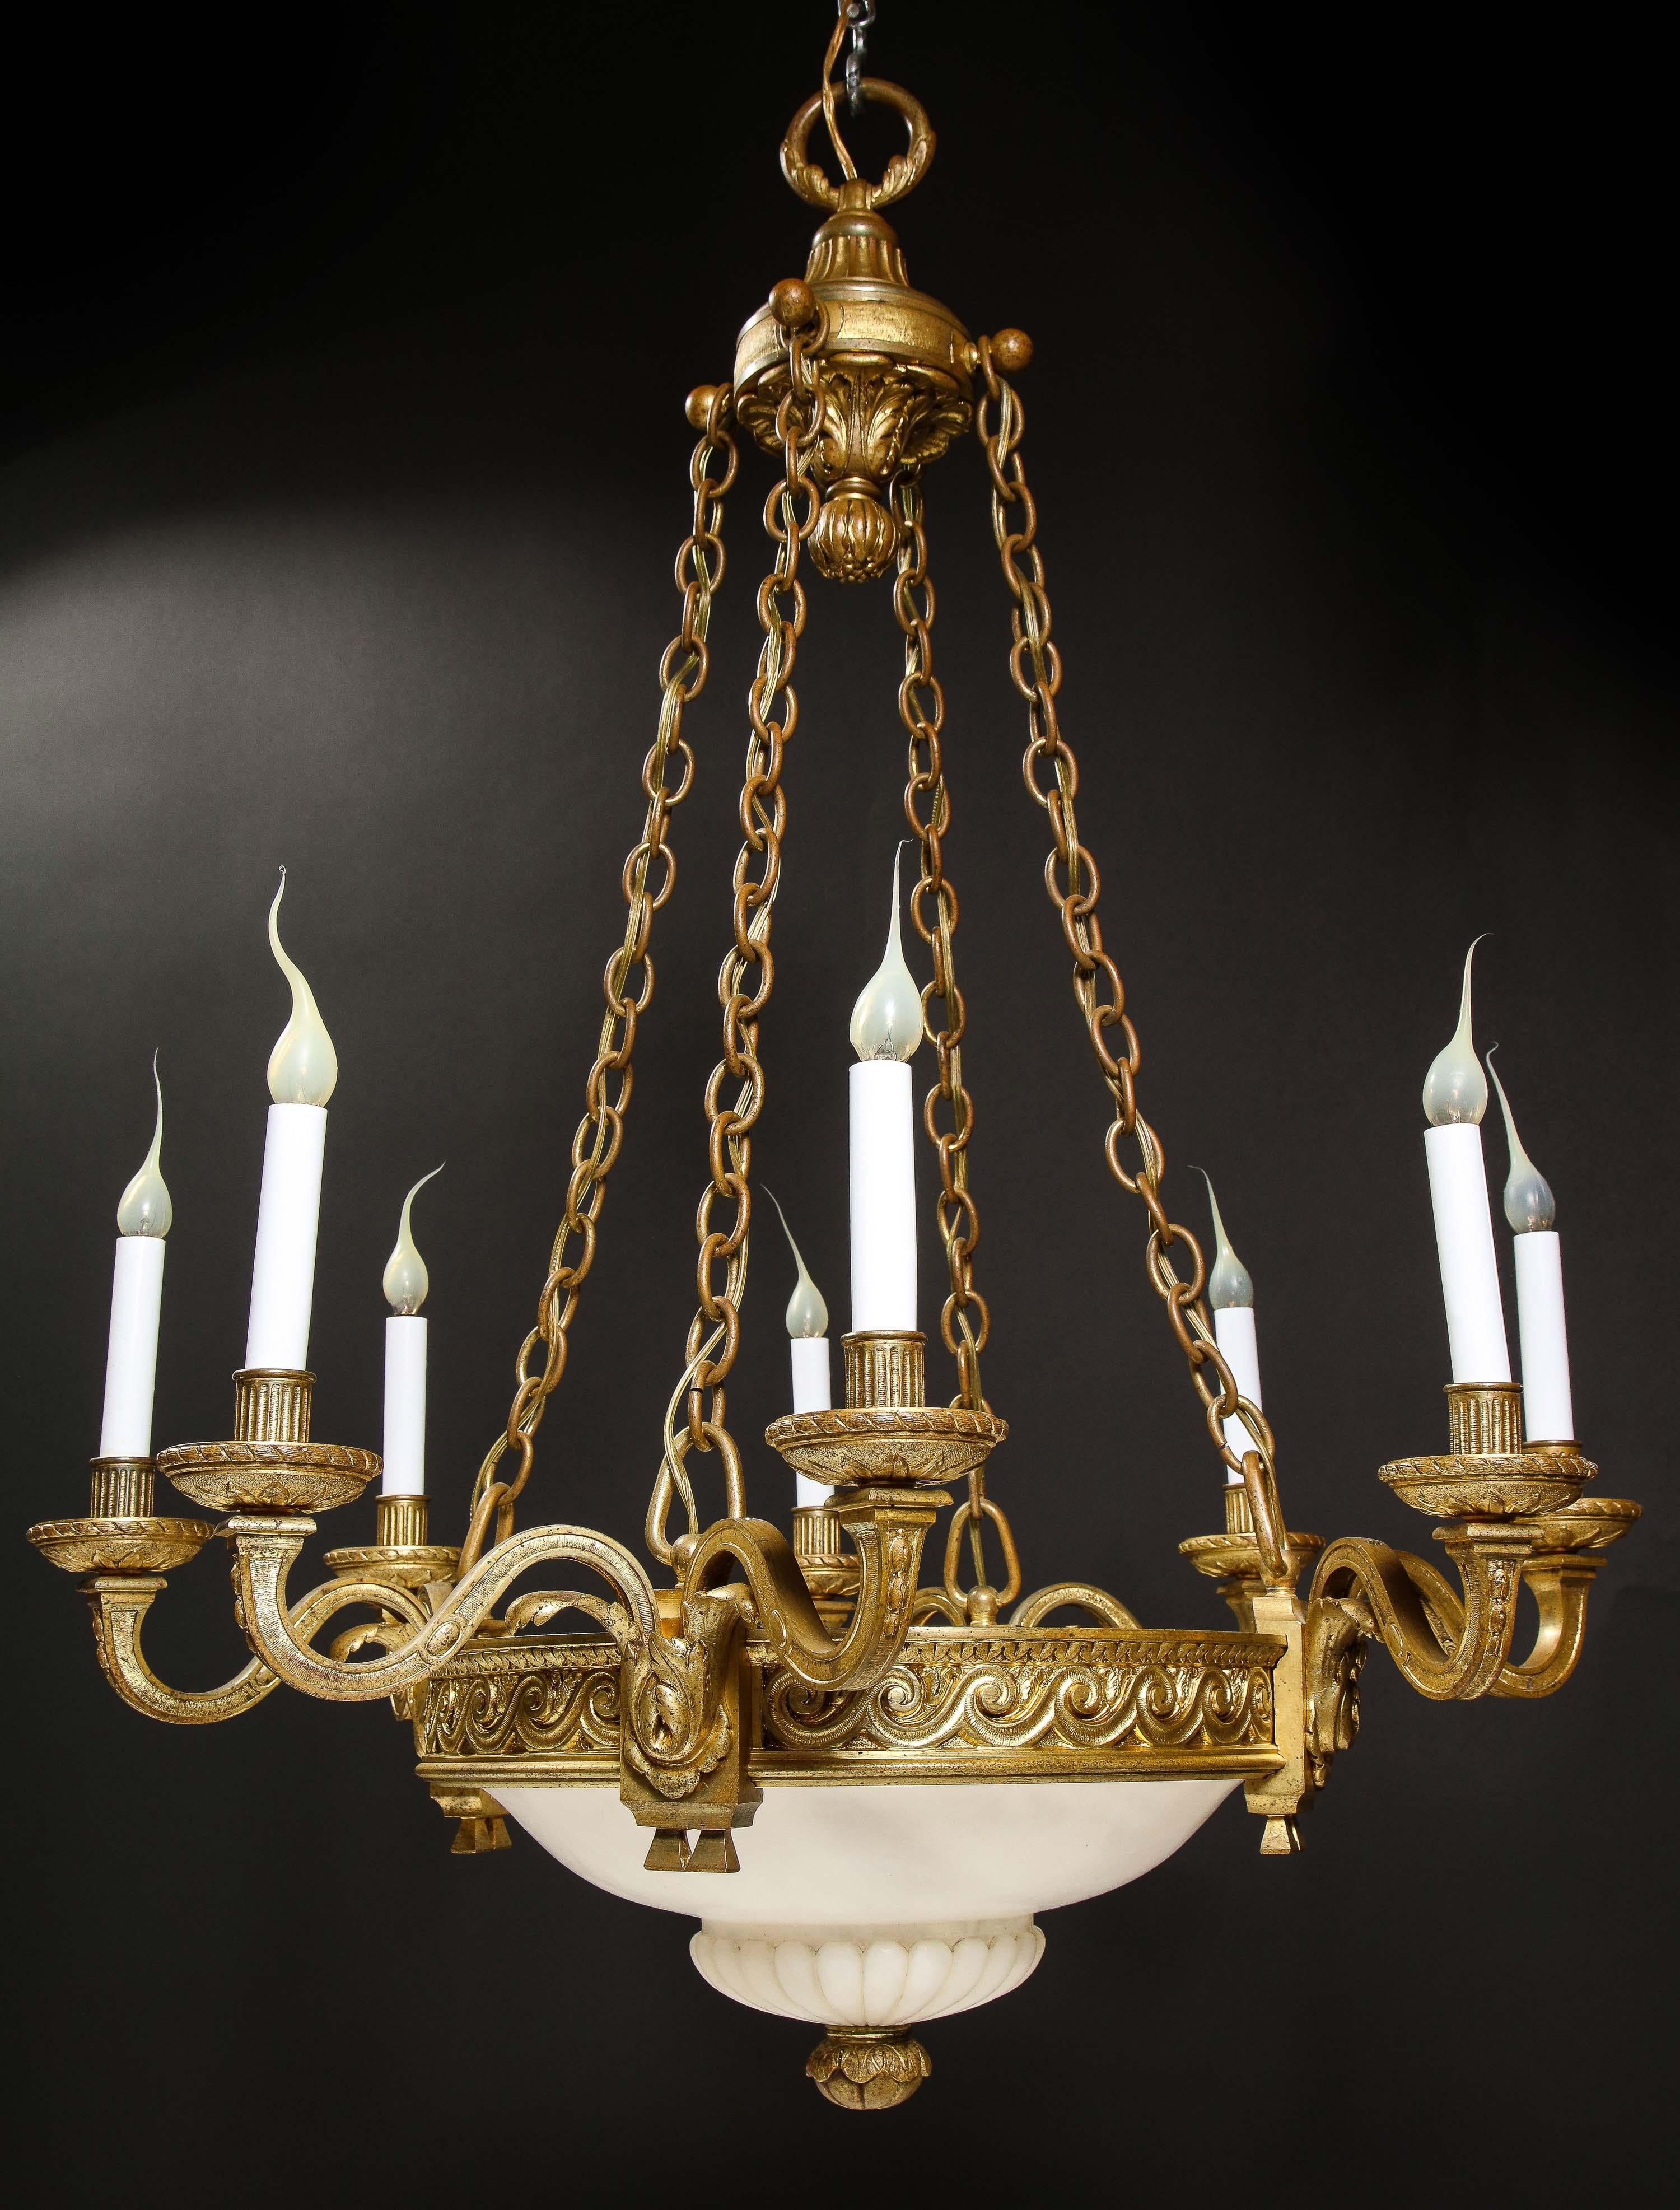 20th Century A French Louis XVI Style Gilt Bronze & Carved Alabaster Chandelier For Sale